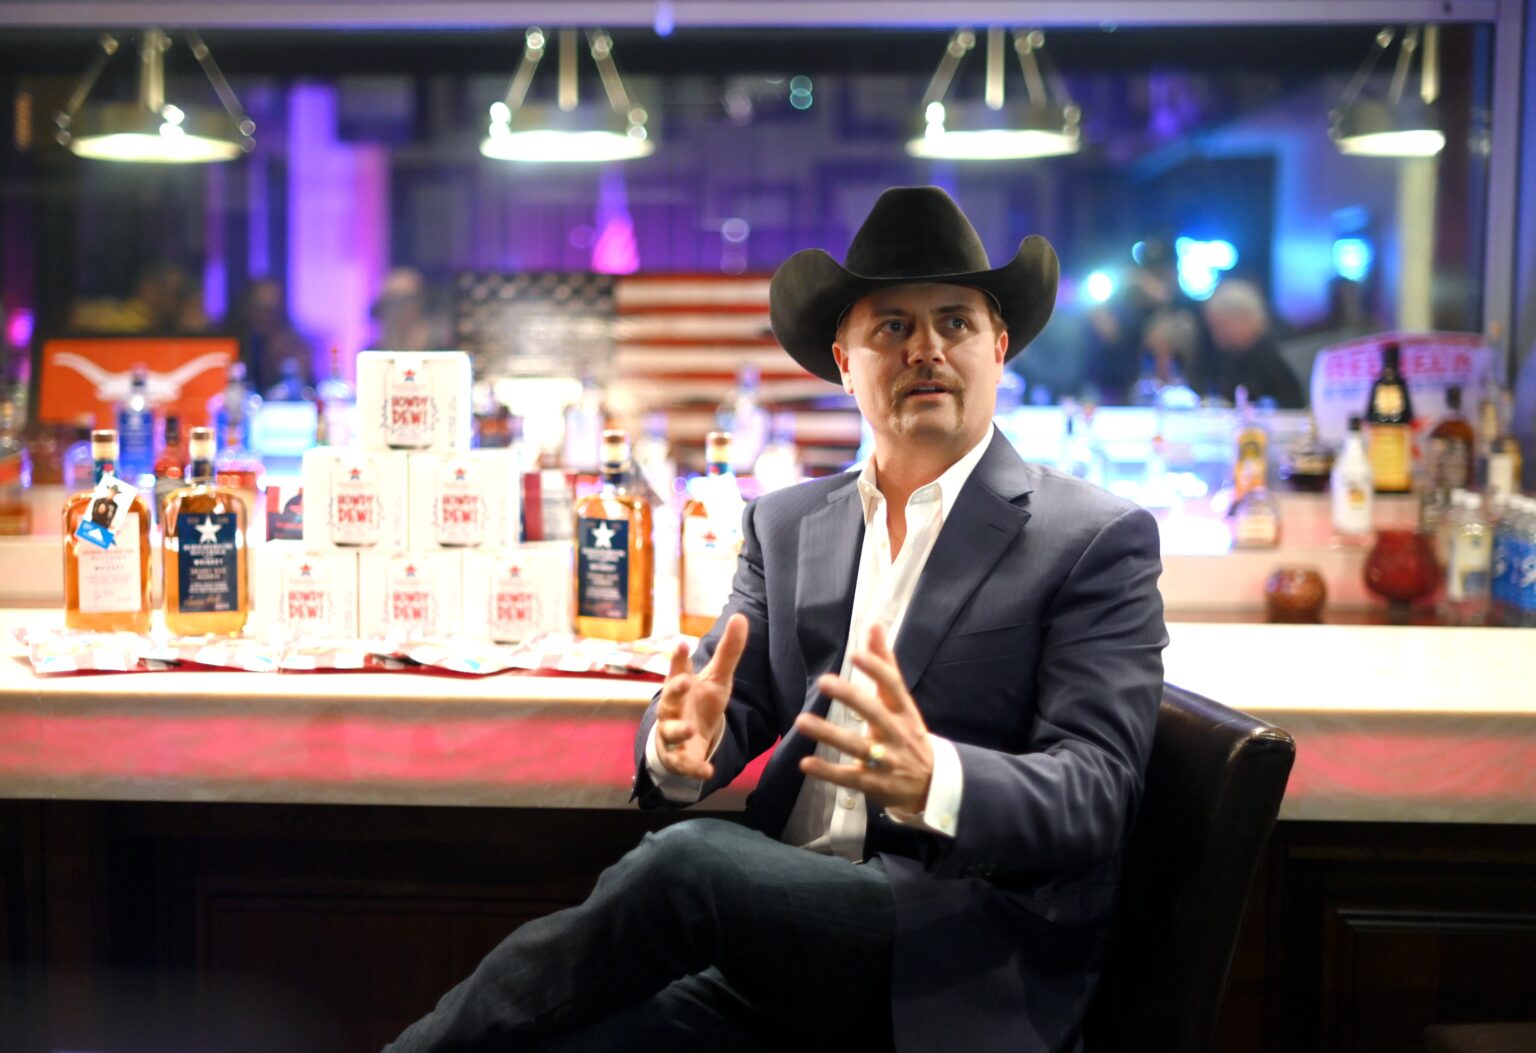 John Rich on cancel culture in America: ‘Our